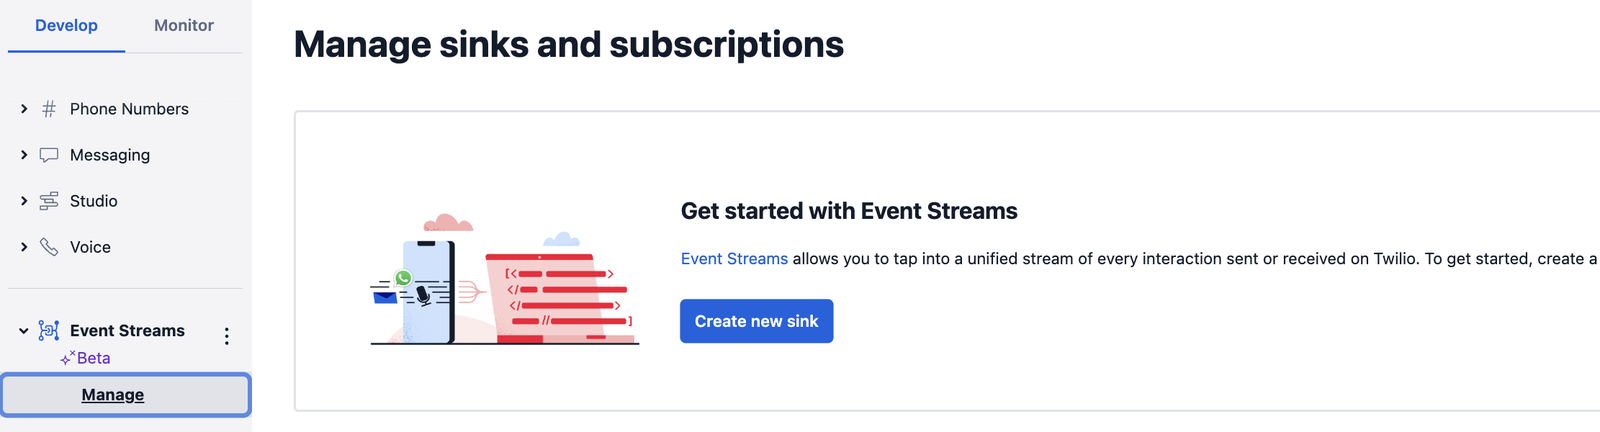 Manage sinks and subscriptions page.